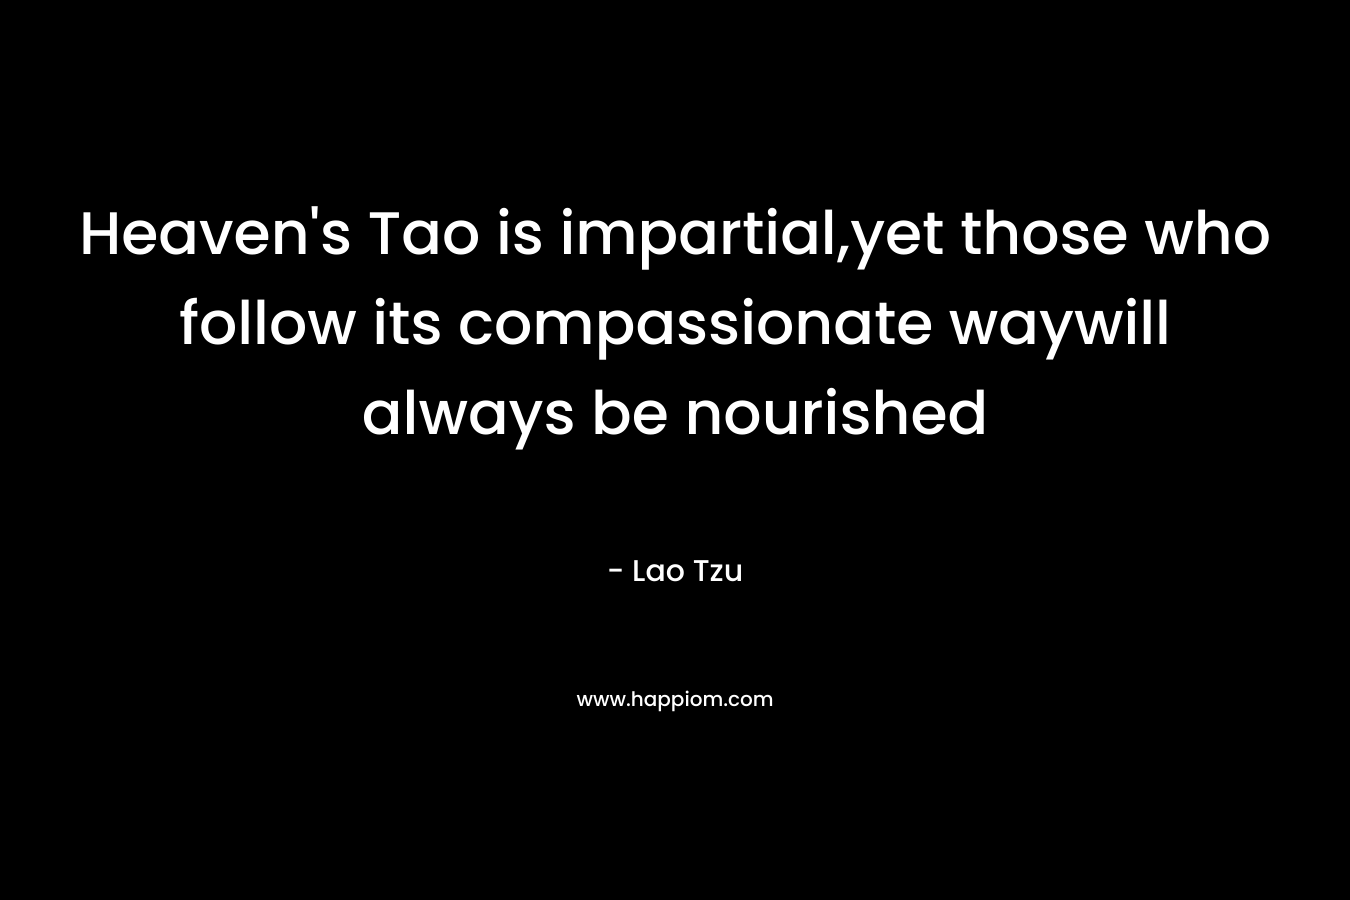 Heaven’s Tao is impartial,yet those who follow its compassionate waywill always be nourished – Lao Tzu